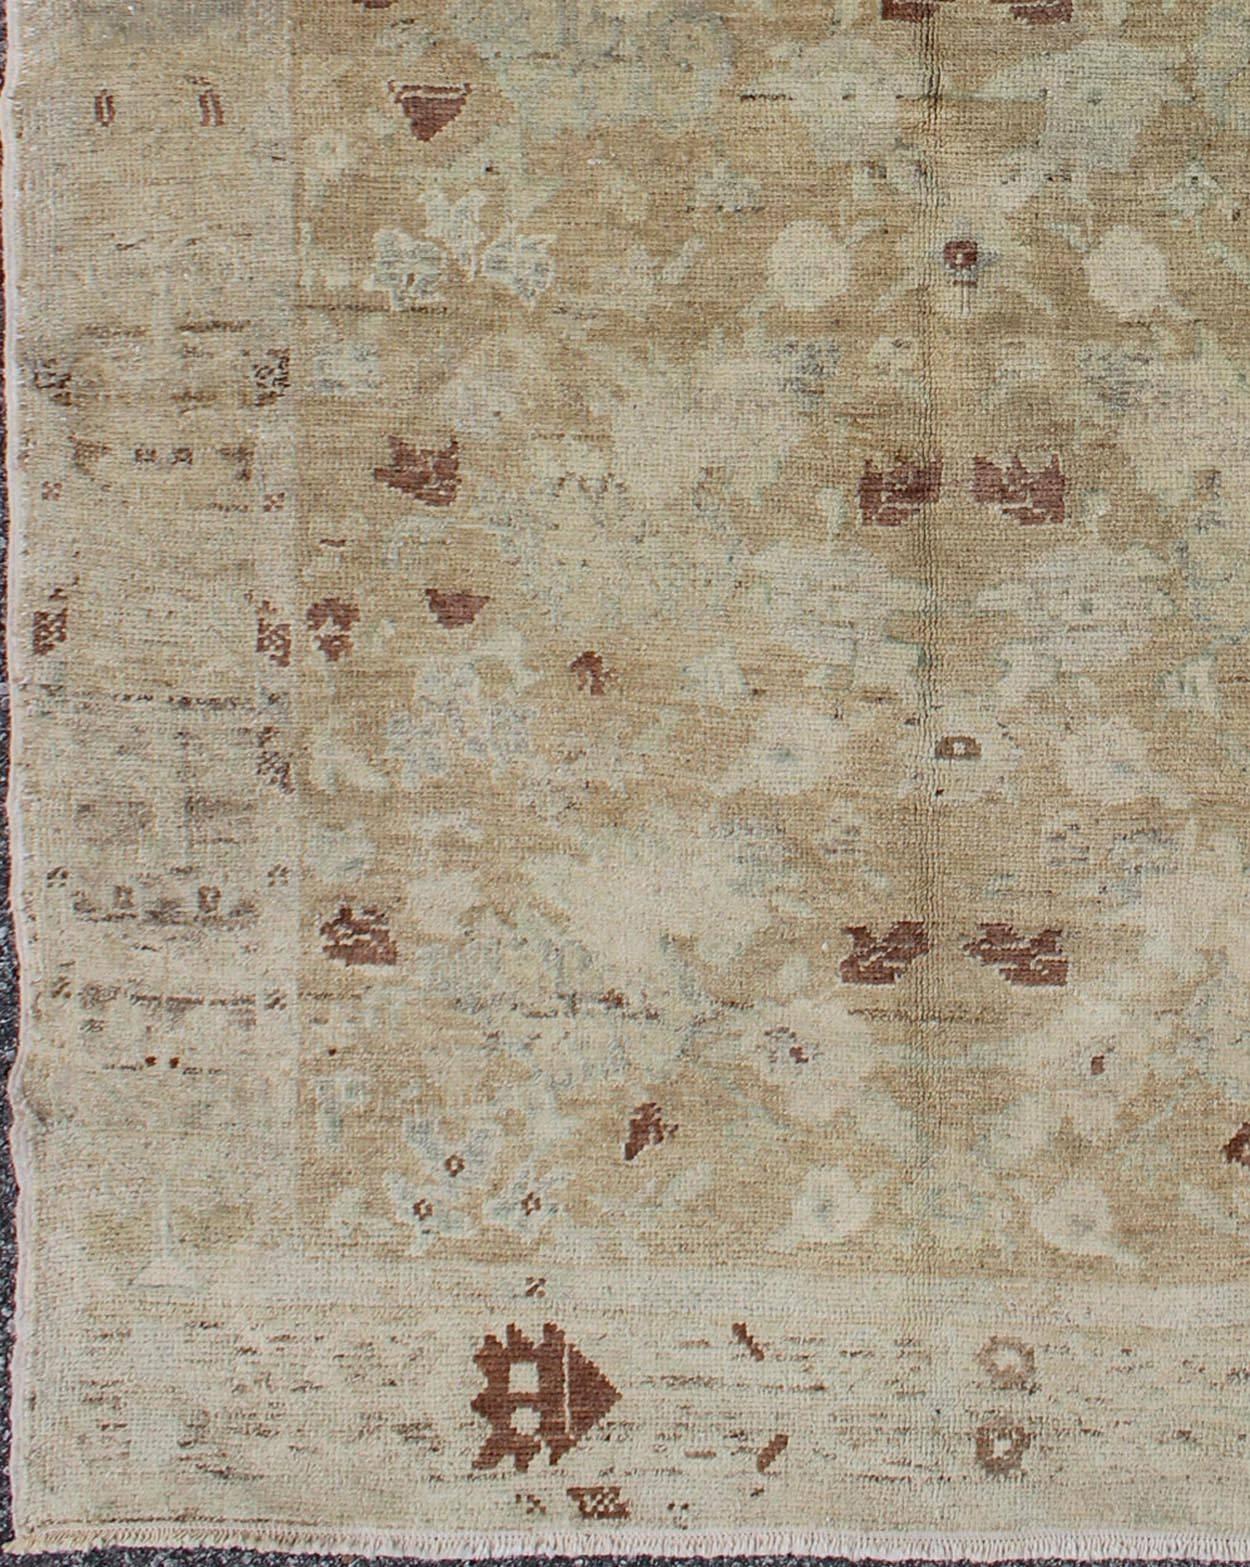 Vintage Turkish Oushak rug from Turkey with All-Over Design, Keivan Woven Arts / rug/EN-142134, country of origin / type: Turkey / Oushak, circa 1940.

This vintage Turkish Oushak rug features a faint background which is has various flora. The